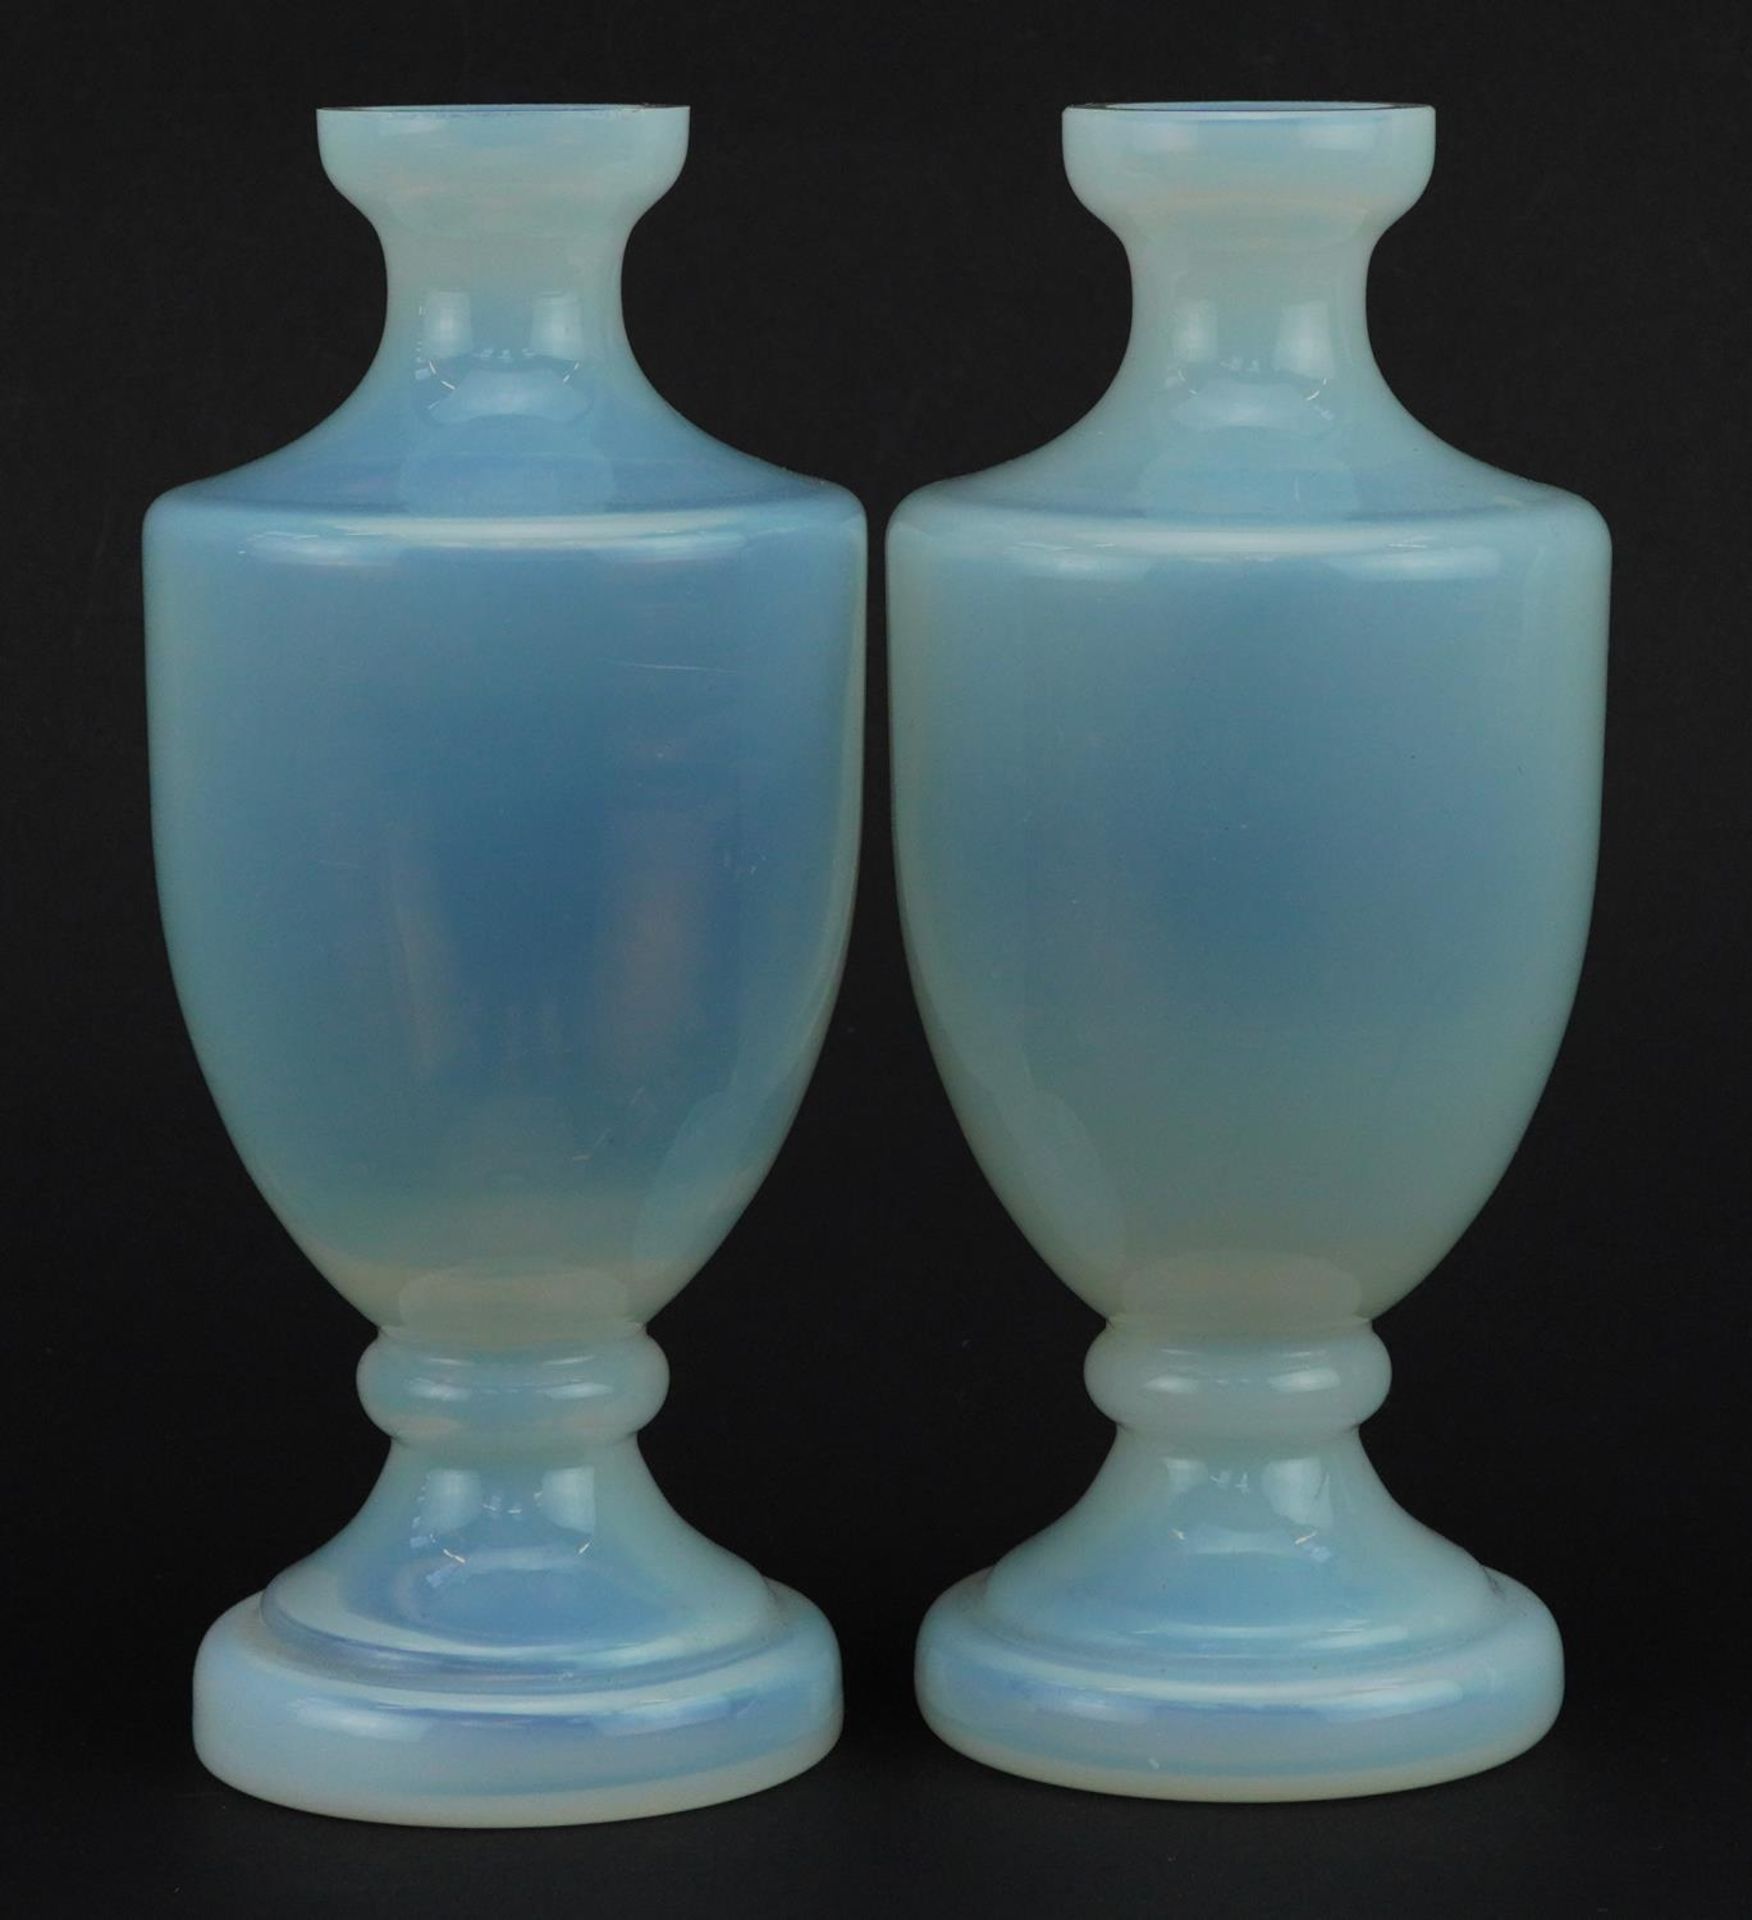 Pair of Victorian style opaline glass vases, each 16cm high : For further information on this lot